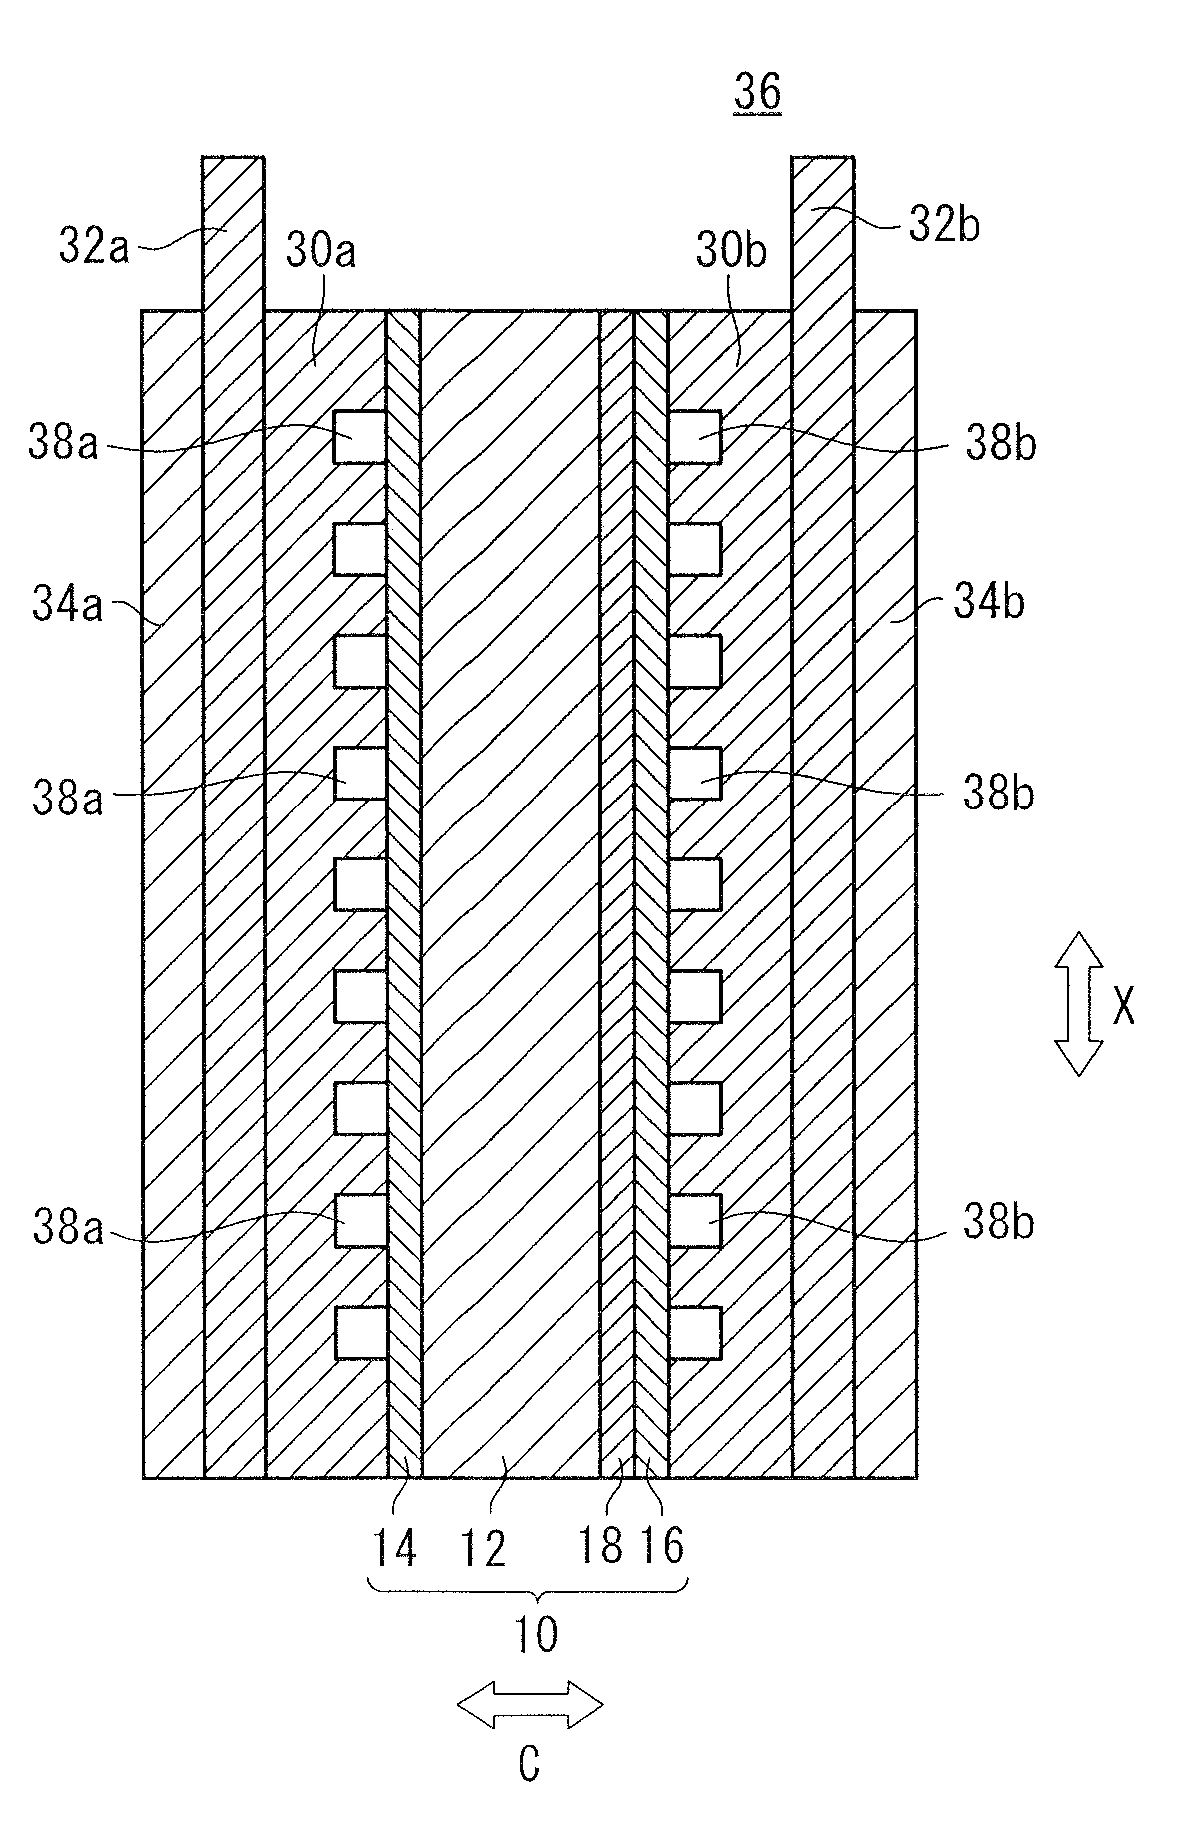 Free-standing membrane electrolyte electrode assembly